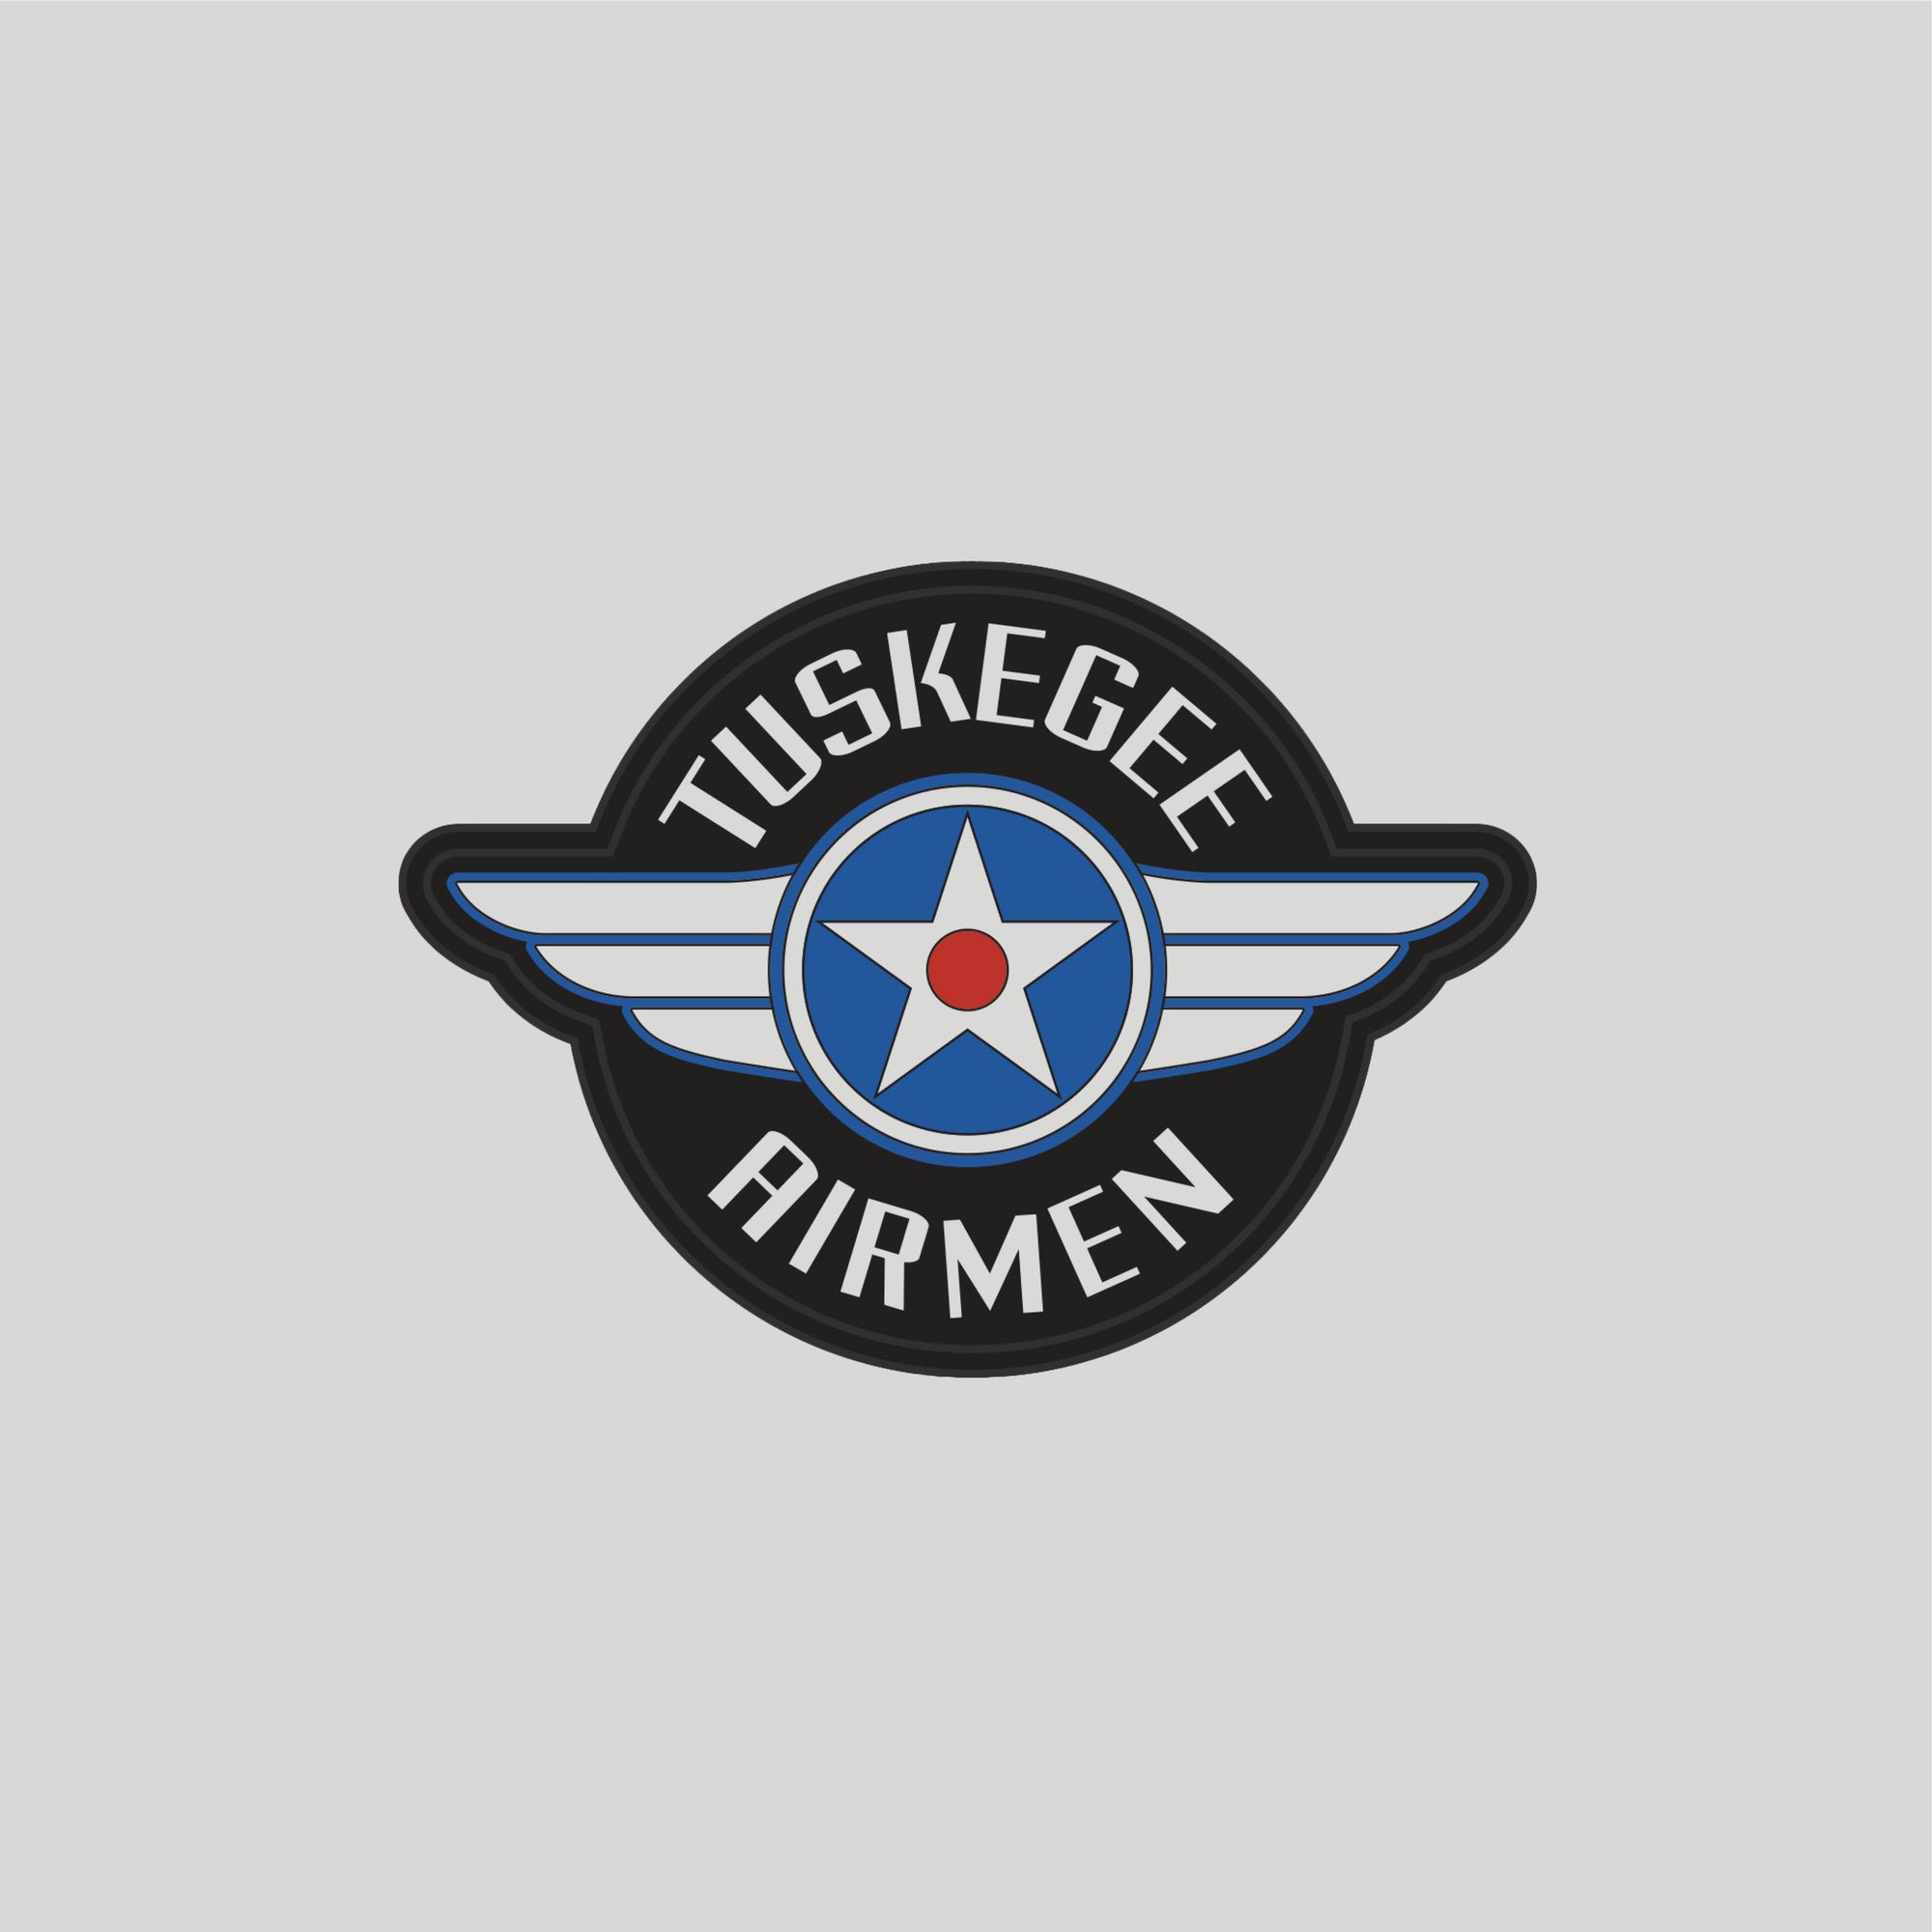 Tuskegee Airman Patch